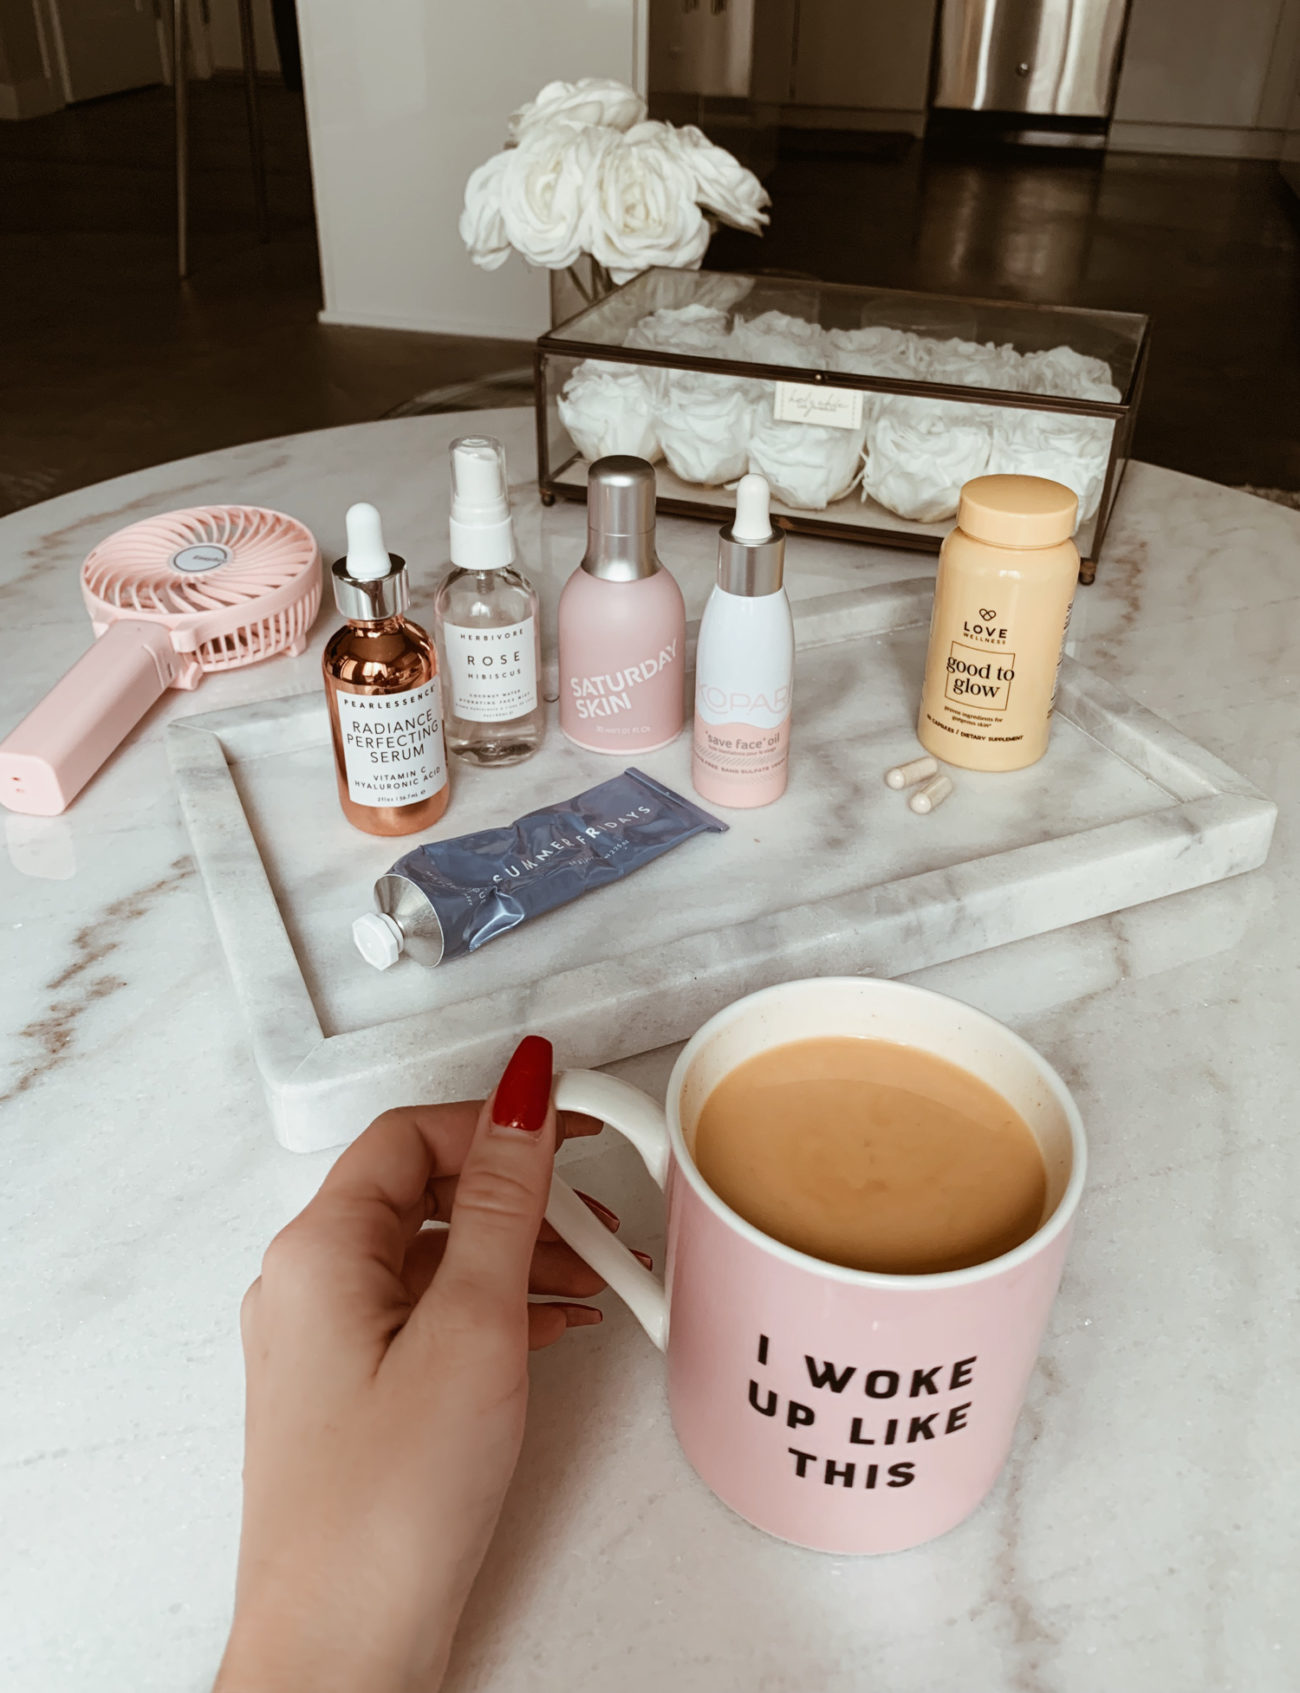 How To Actually Wake Up Like This | Skincare Routine | Good To Glow Wellness Supplements | Guide To Perfect Skin | Blondie in the City by Hayley Larue